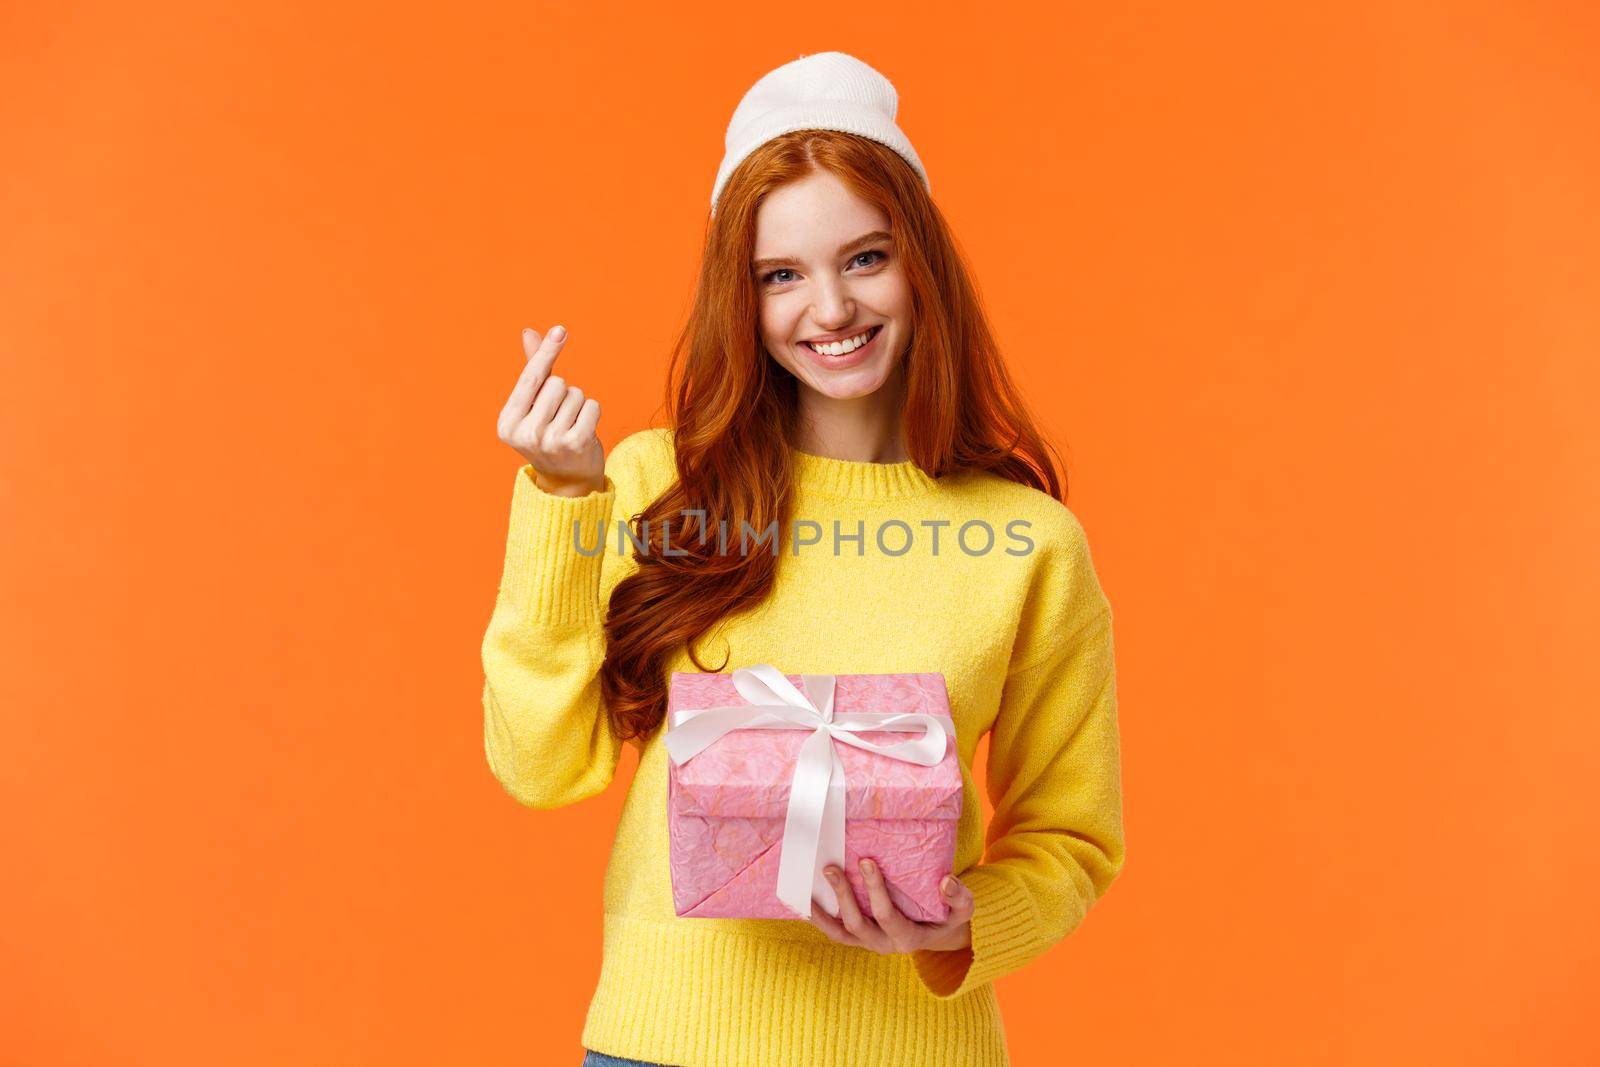 Lovely redhead girlfriend got gift from her girl, showing korean heart gesture and smiling silly, holding pink present box, wearing winter beanie, standing over orange background happy.